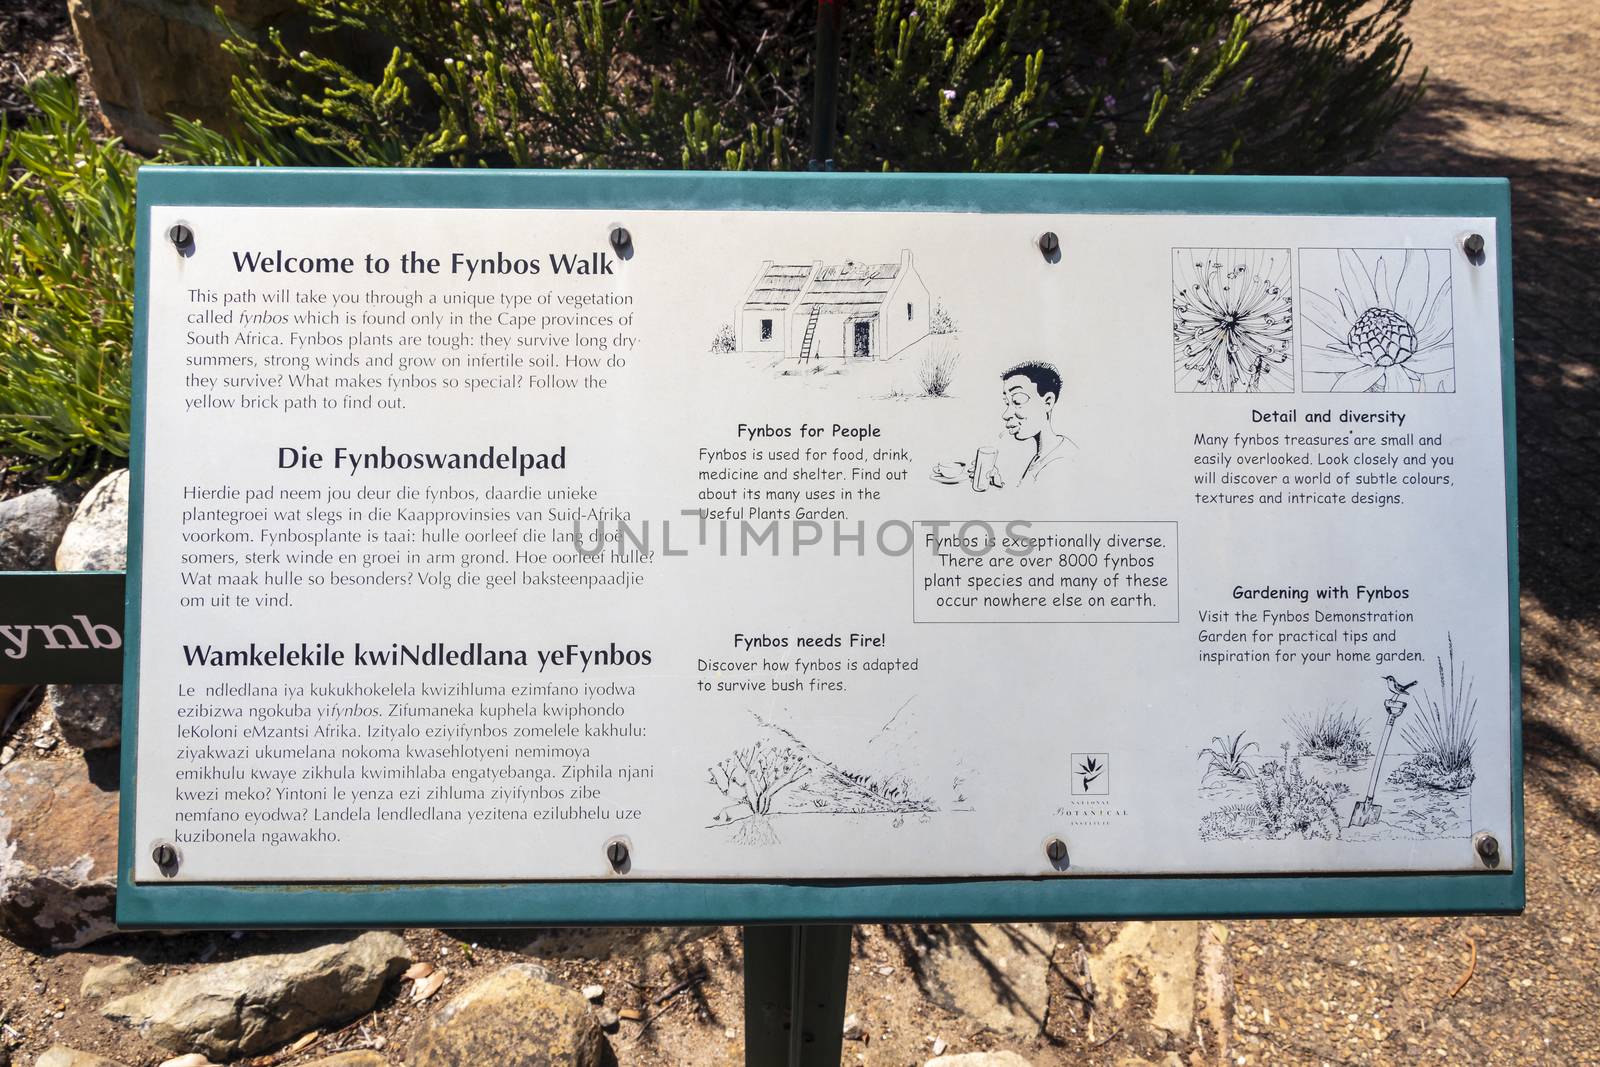 Fynbos Walk green turquoise information sign in Kirstenbosch, Cape Town, South Africa.